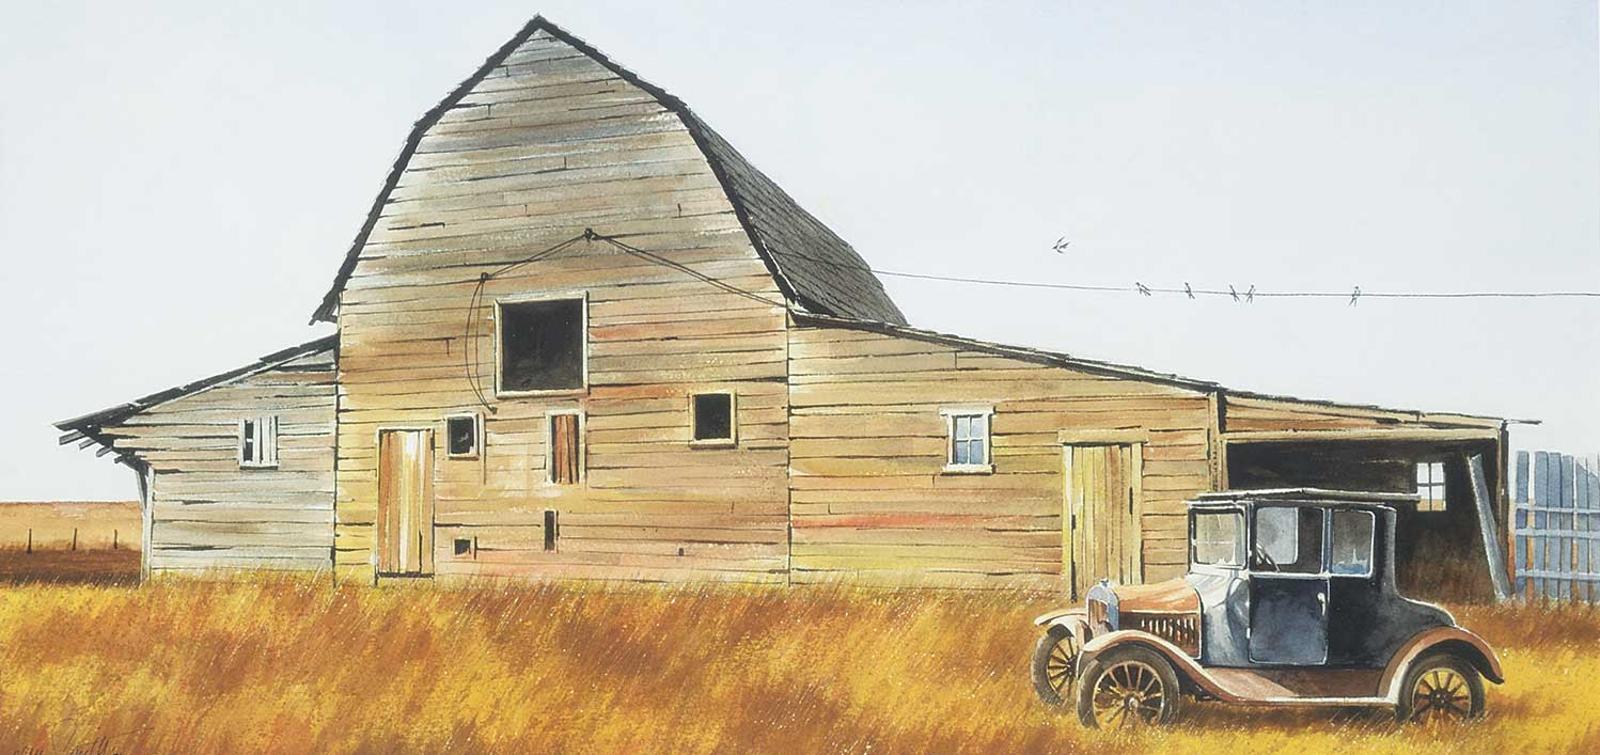 Bern Smith - Untitled - The Old Car and the Barn